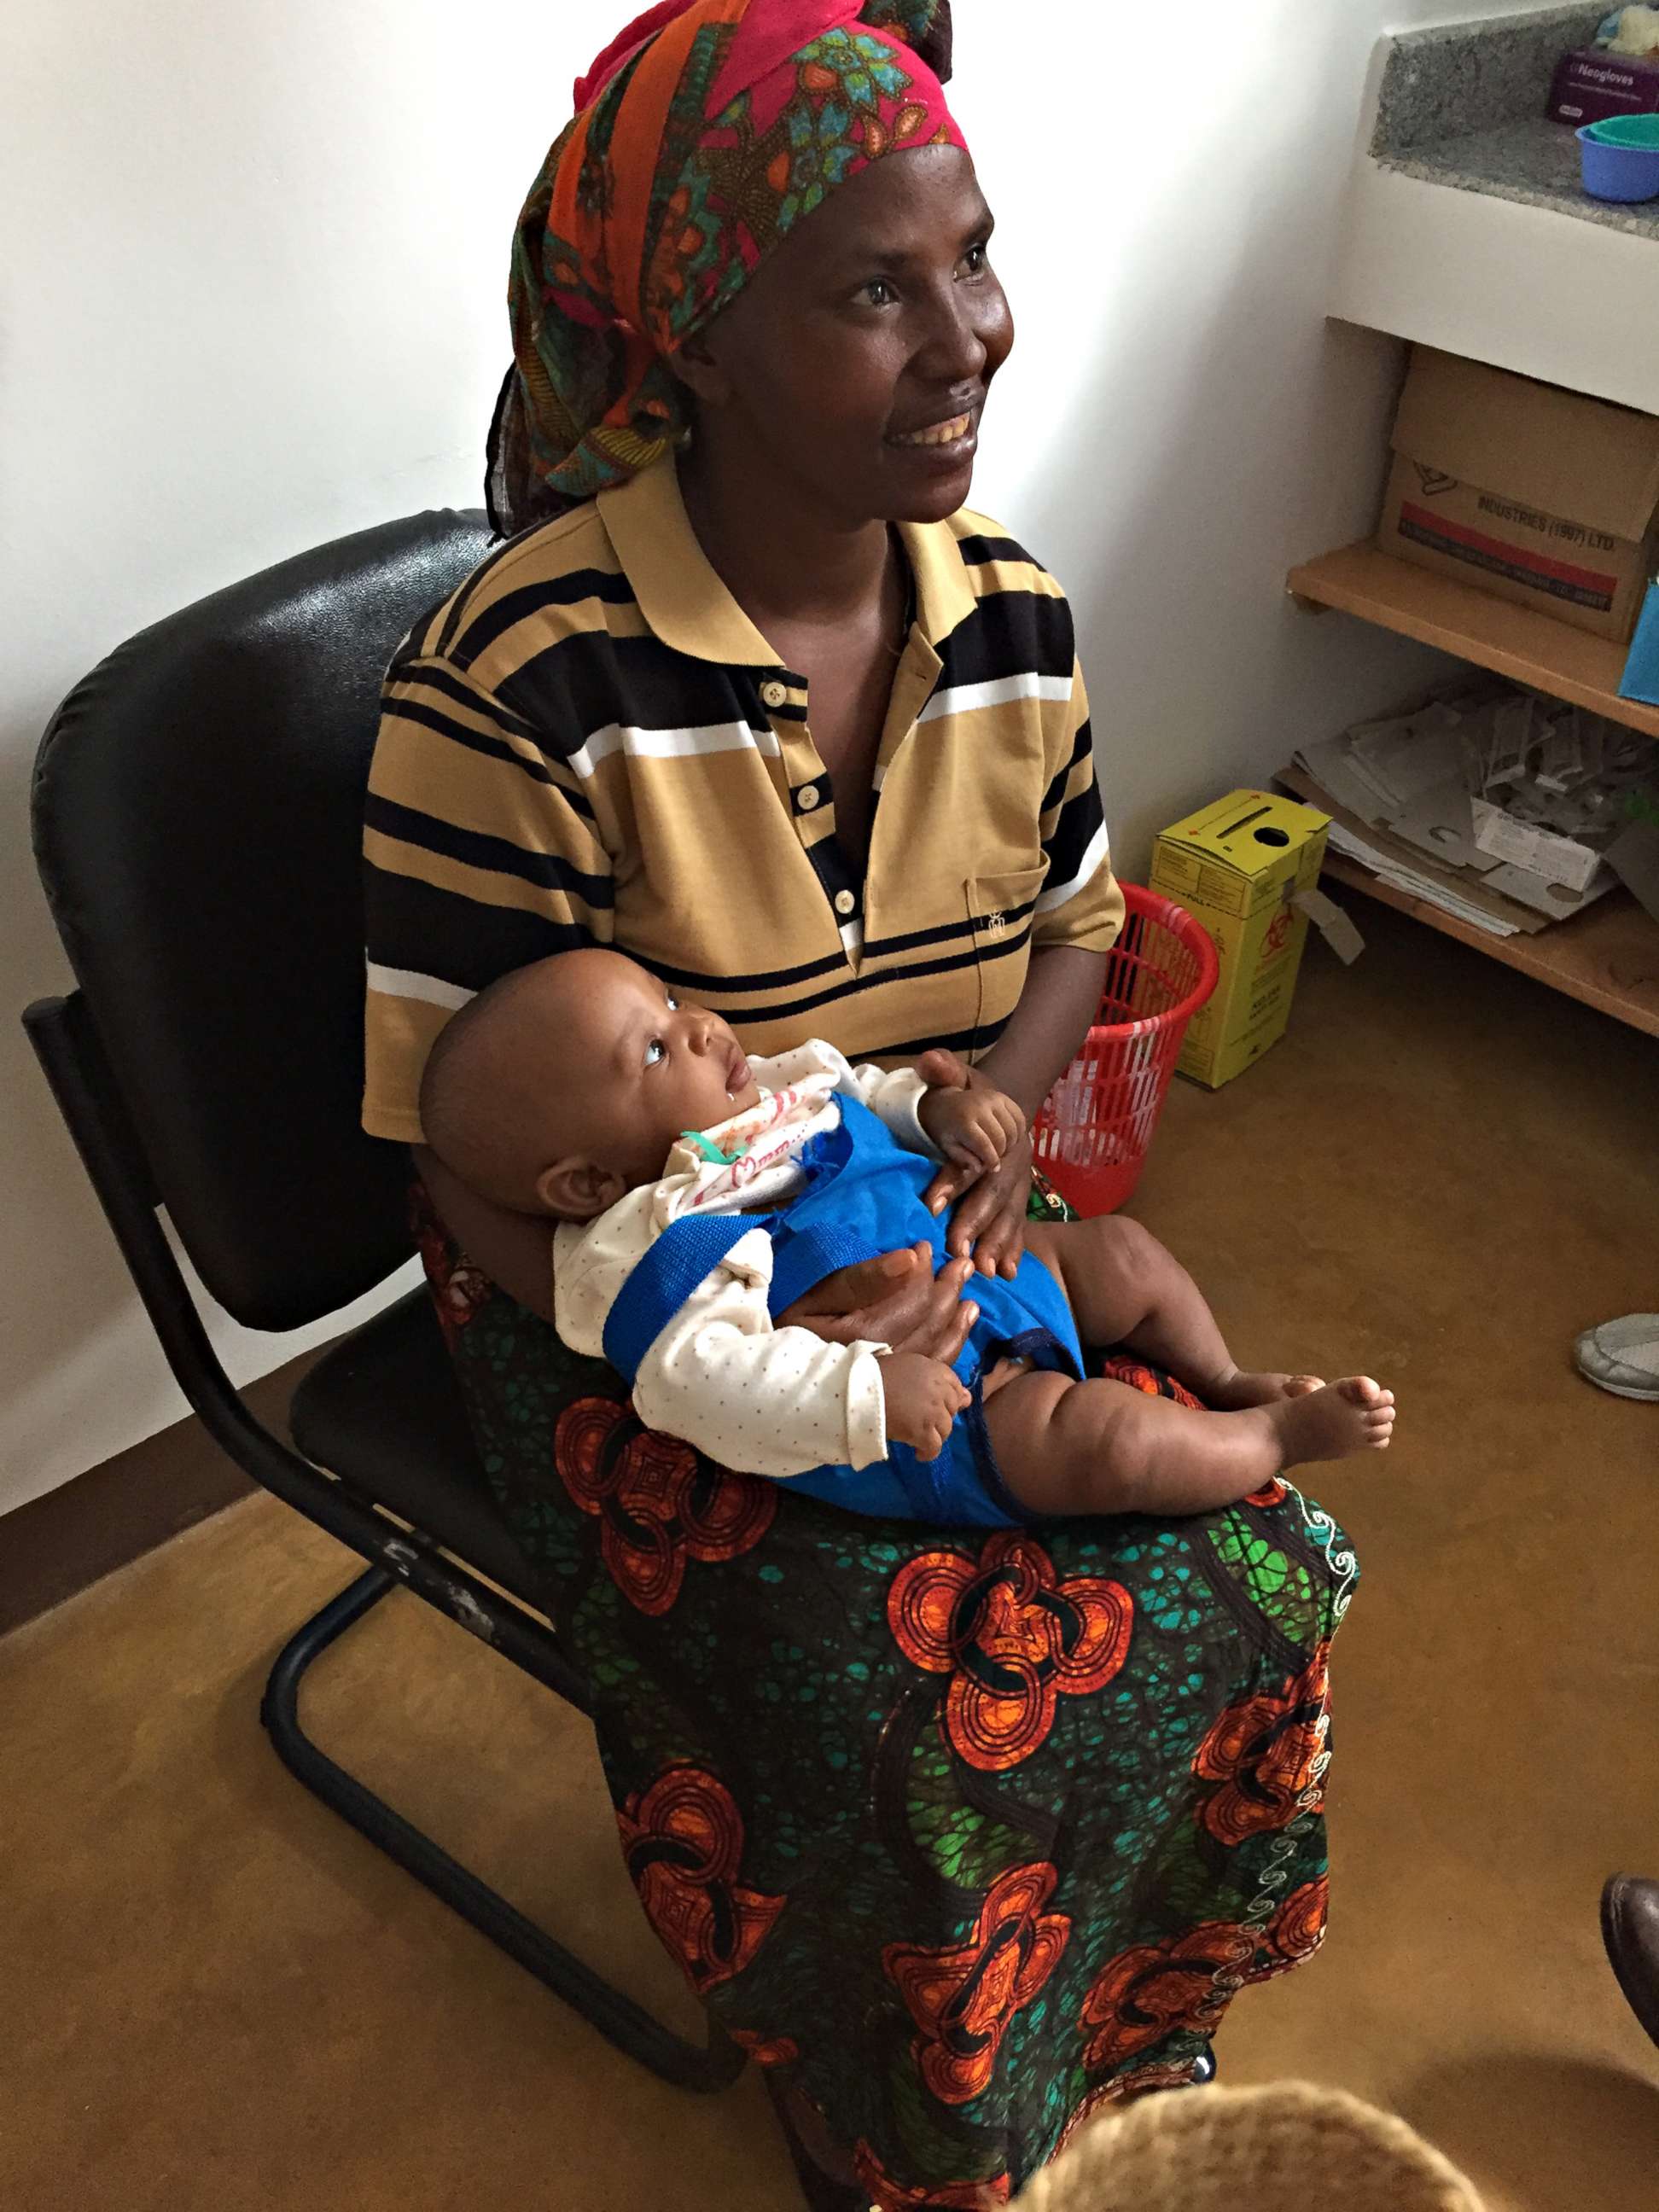 PHOTO: More the 500 babies, many with severe complications, were safely delivered at FAME medical hospital in Tanzania last year.